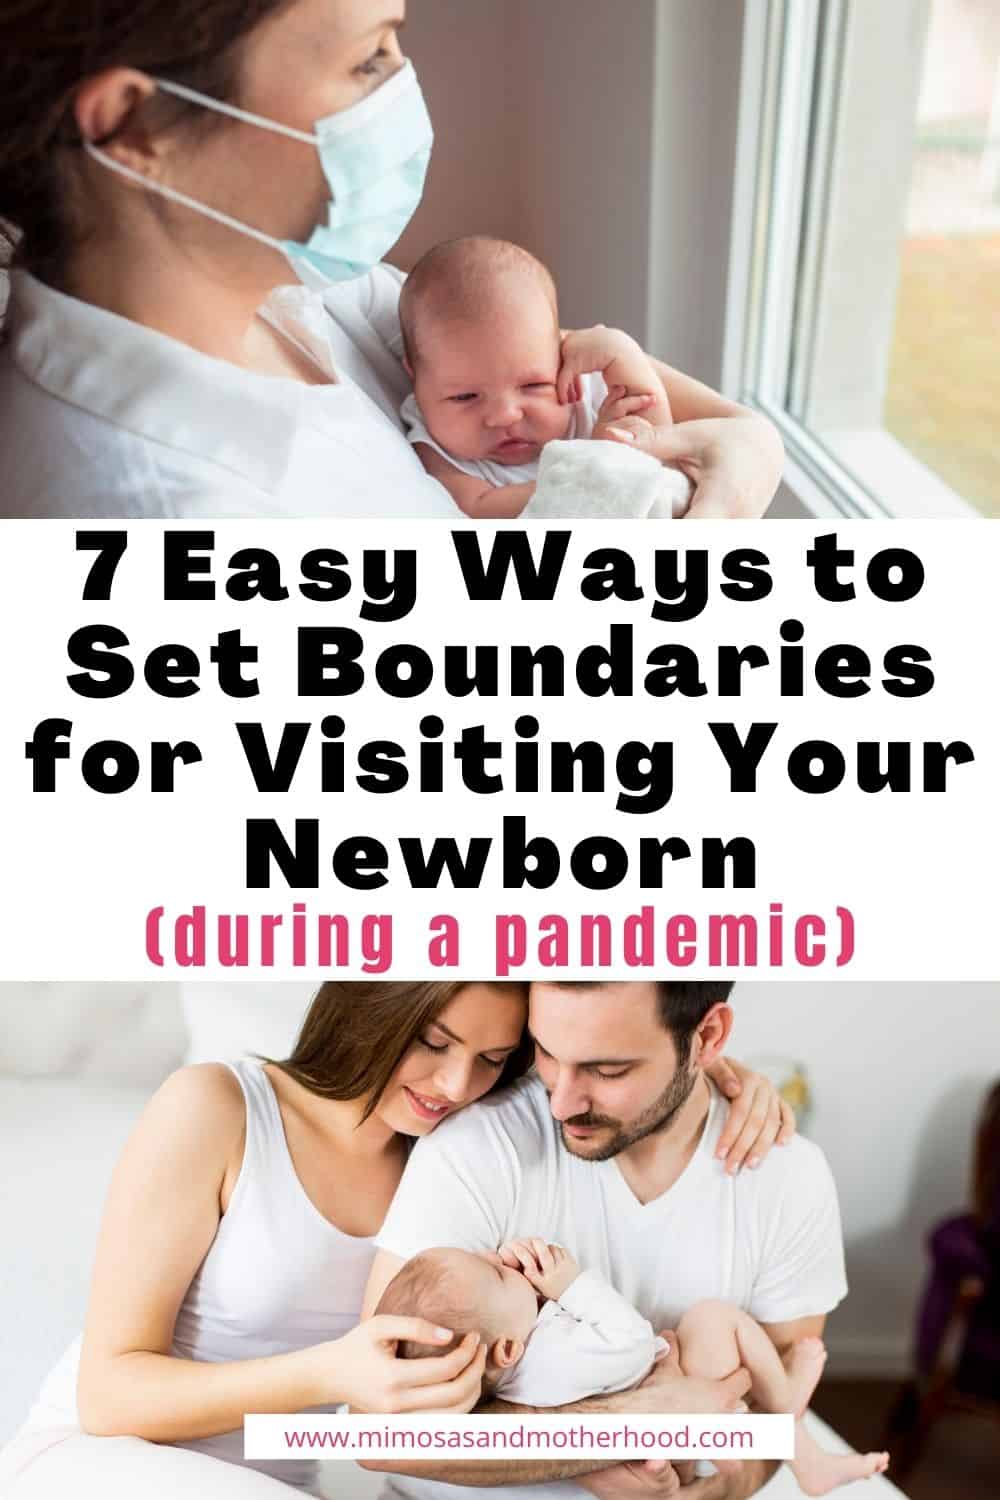 7 Easy Ways To Set Boundaries For Your Newborn During a Pandemic